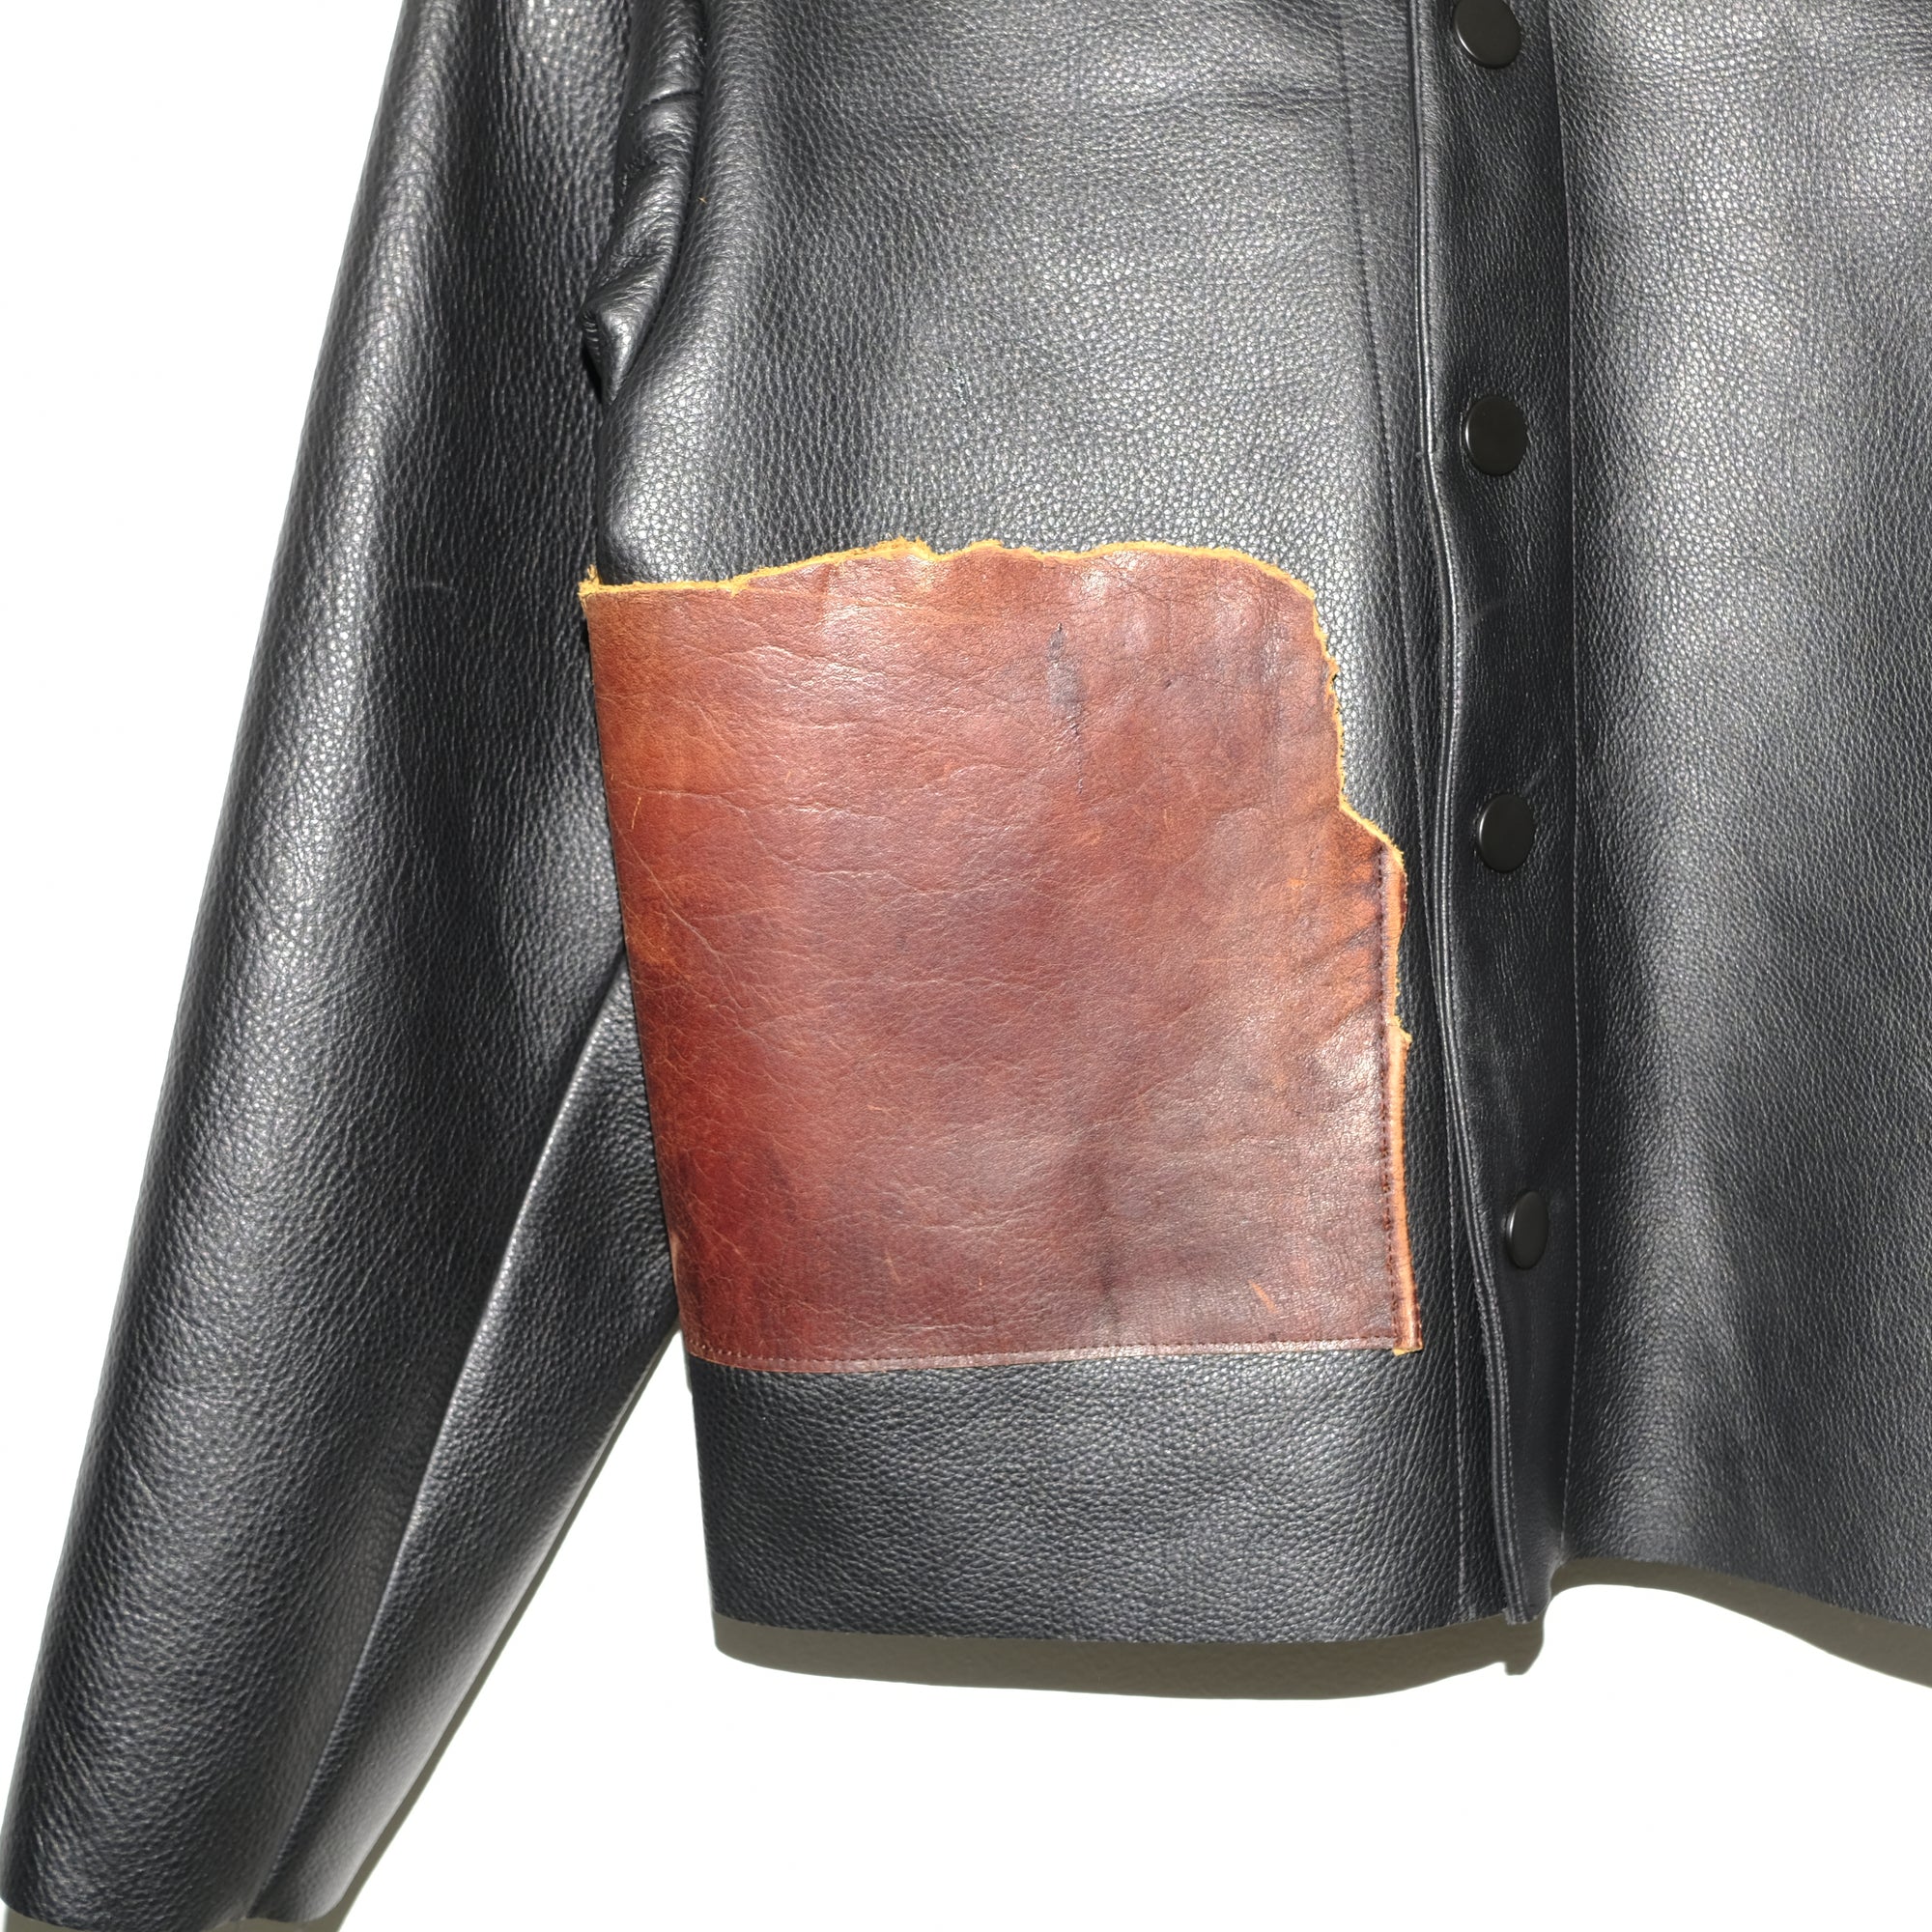 raw edge leather patchwork bomber - size small